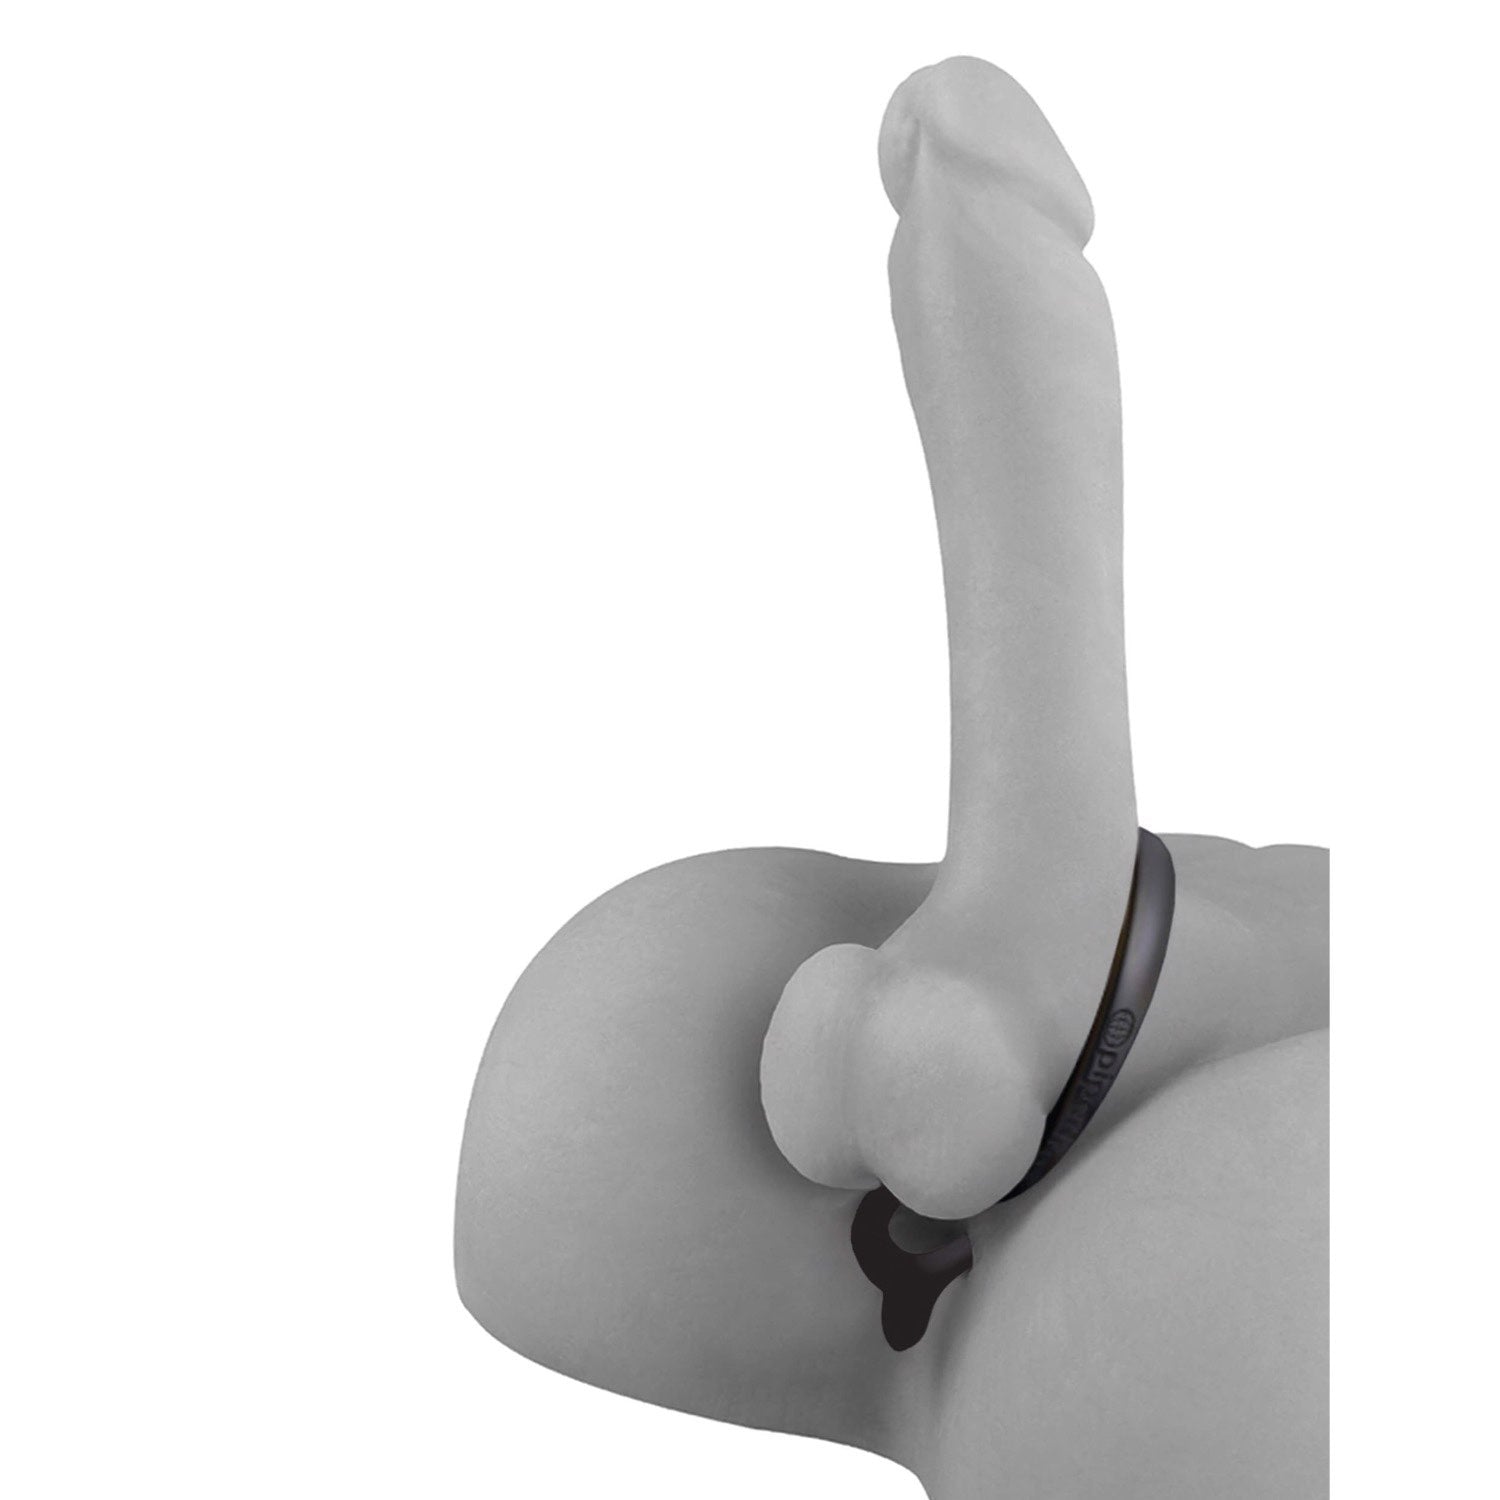 Anal Fantasy Collection Ass-Gasm Cockring Anal Beads - Black Cock Ring with Anal Plug by Pipedream